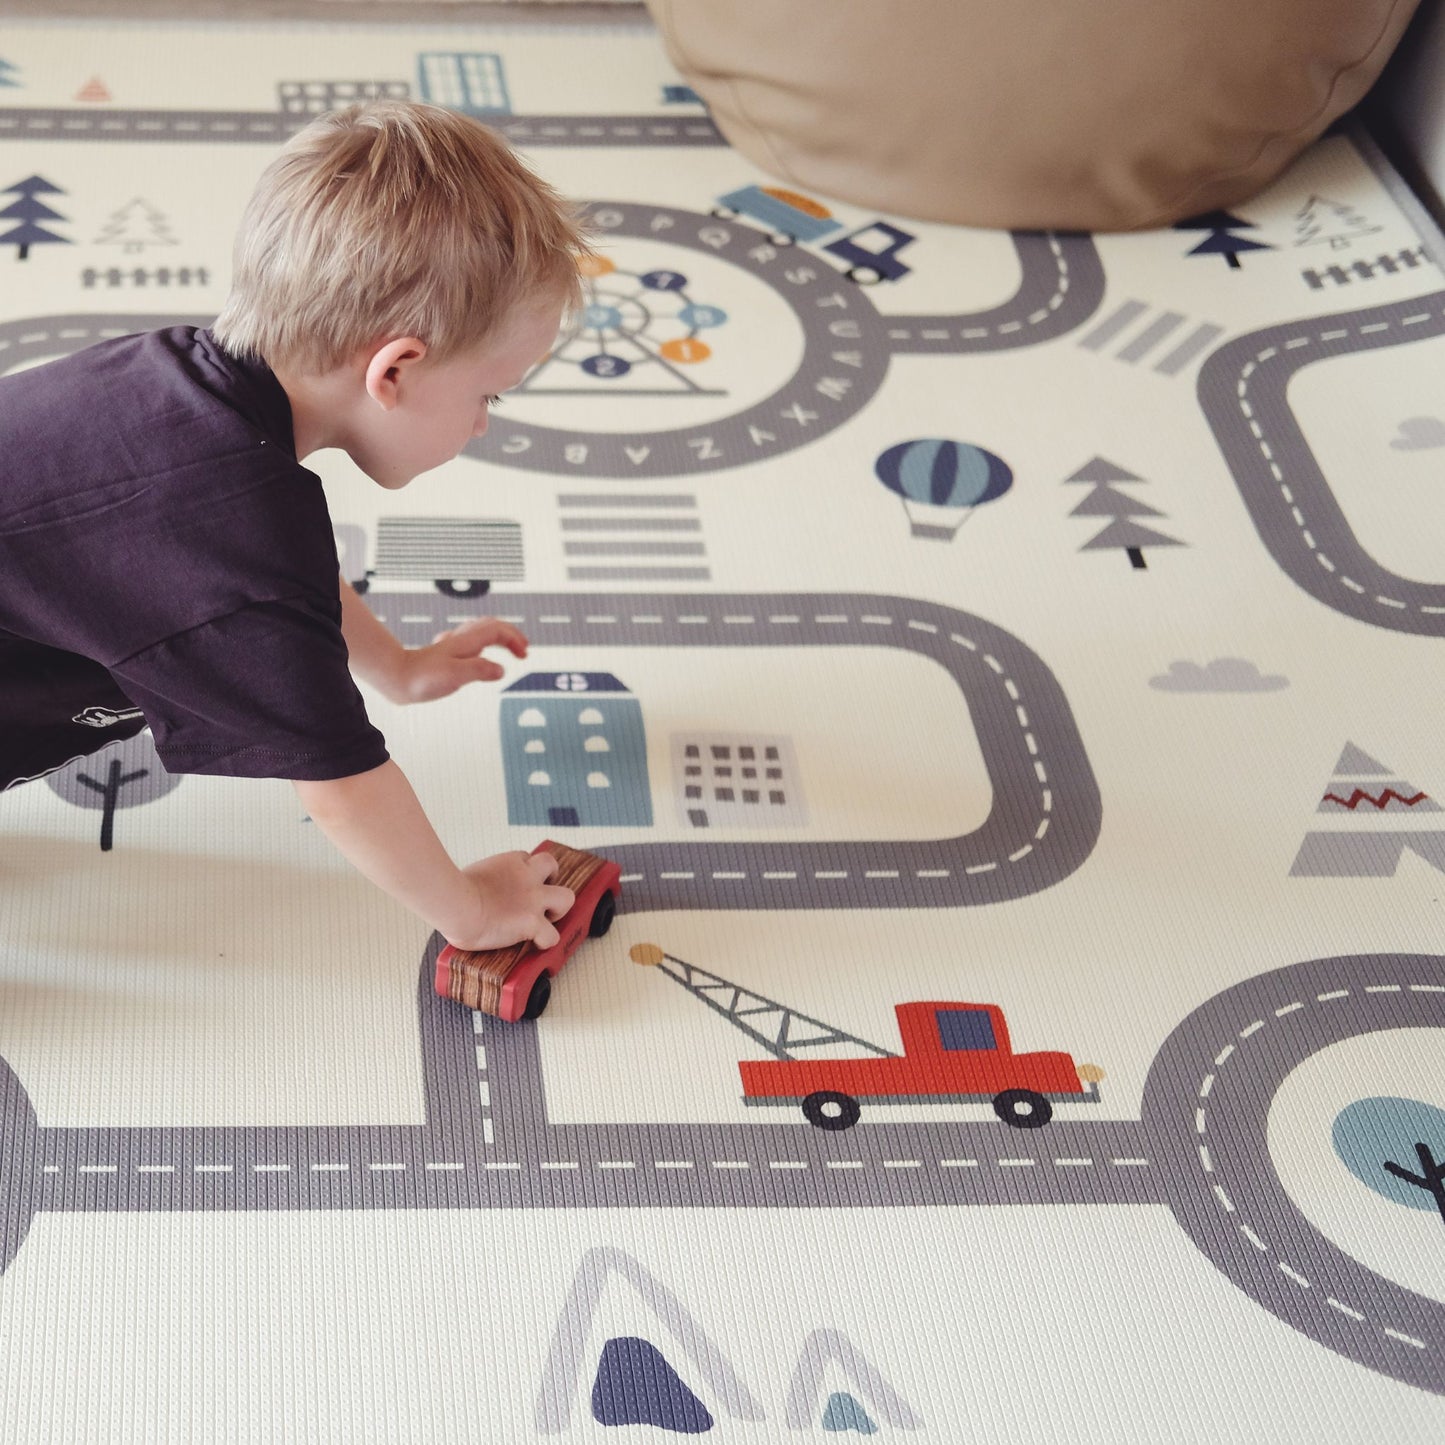 Under the Sea and Car Track play mat